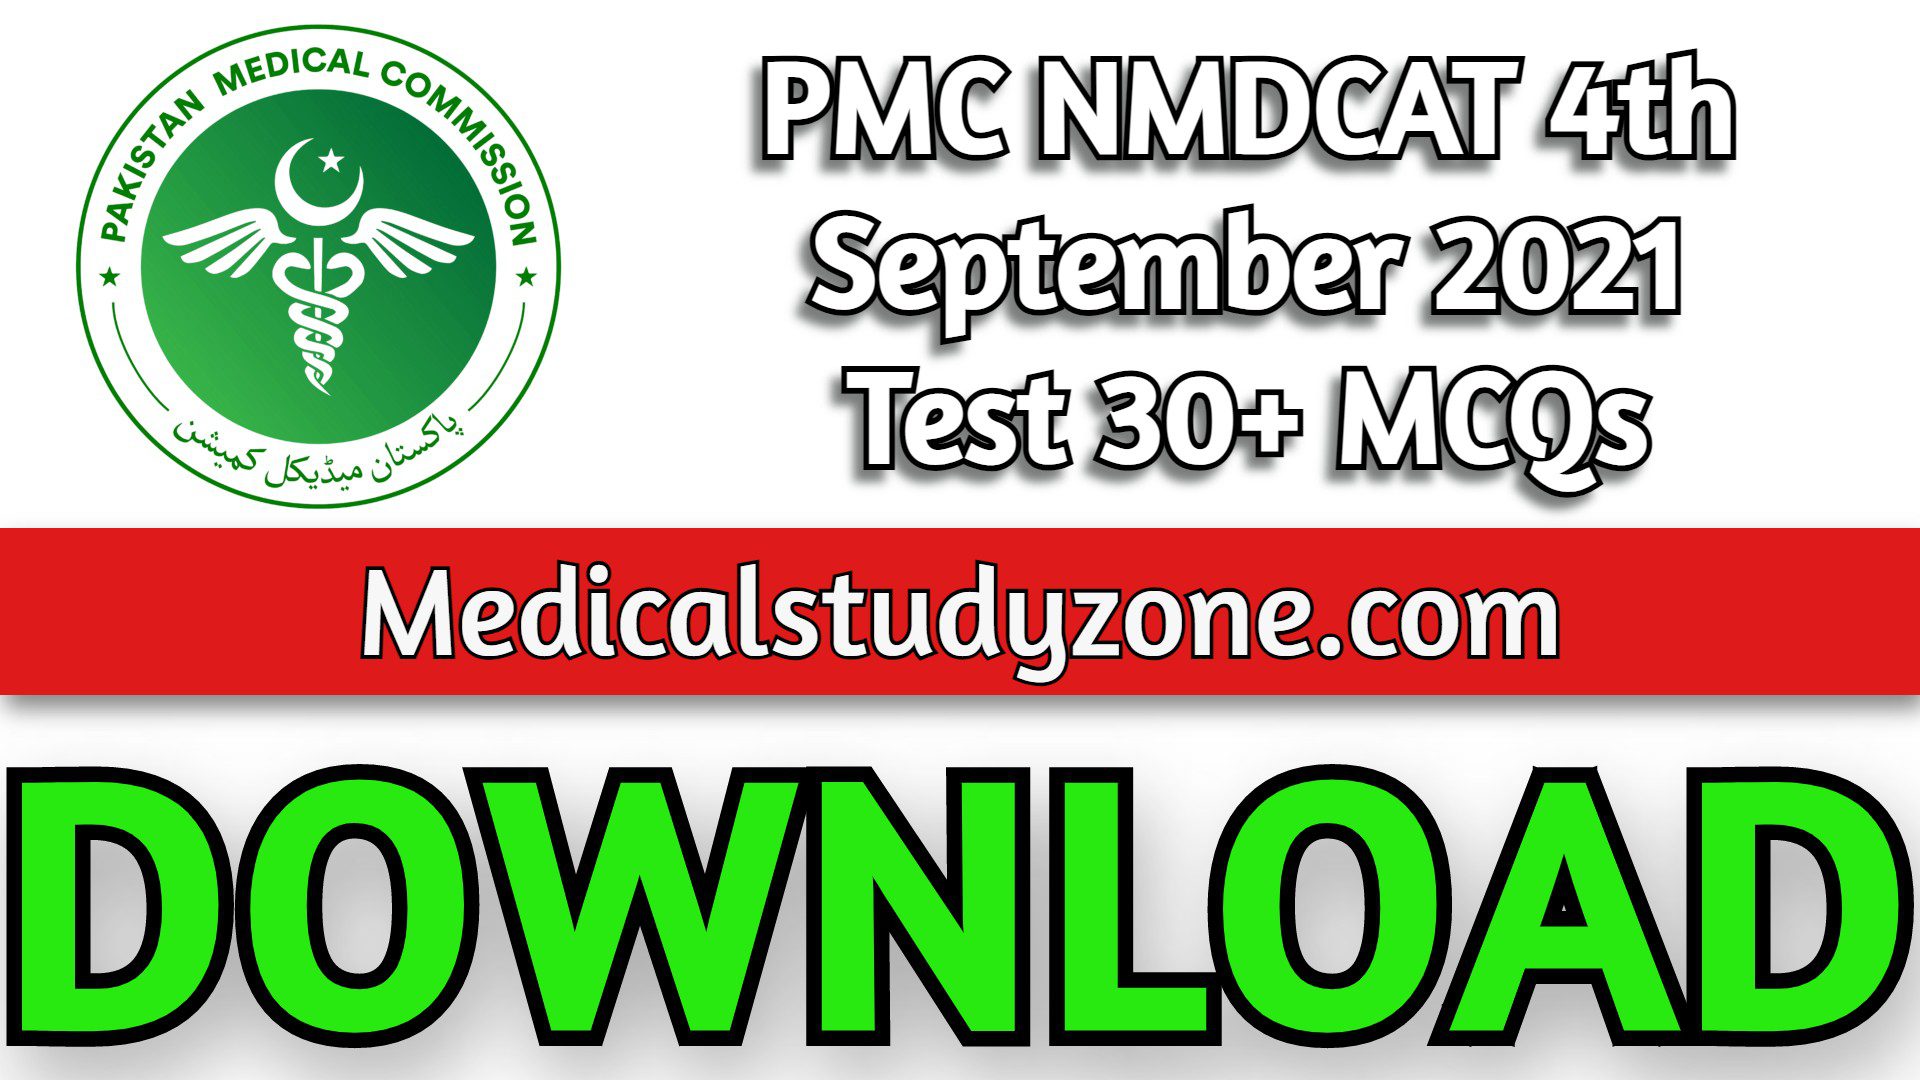 PMC NMDCAT 4th September 2021 Test 30+ MCQs Collection PDF Free Download